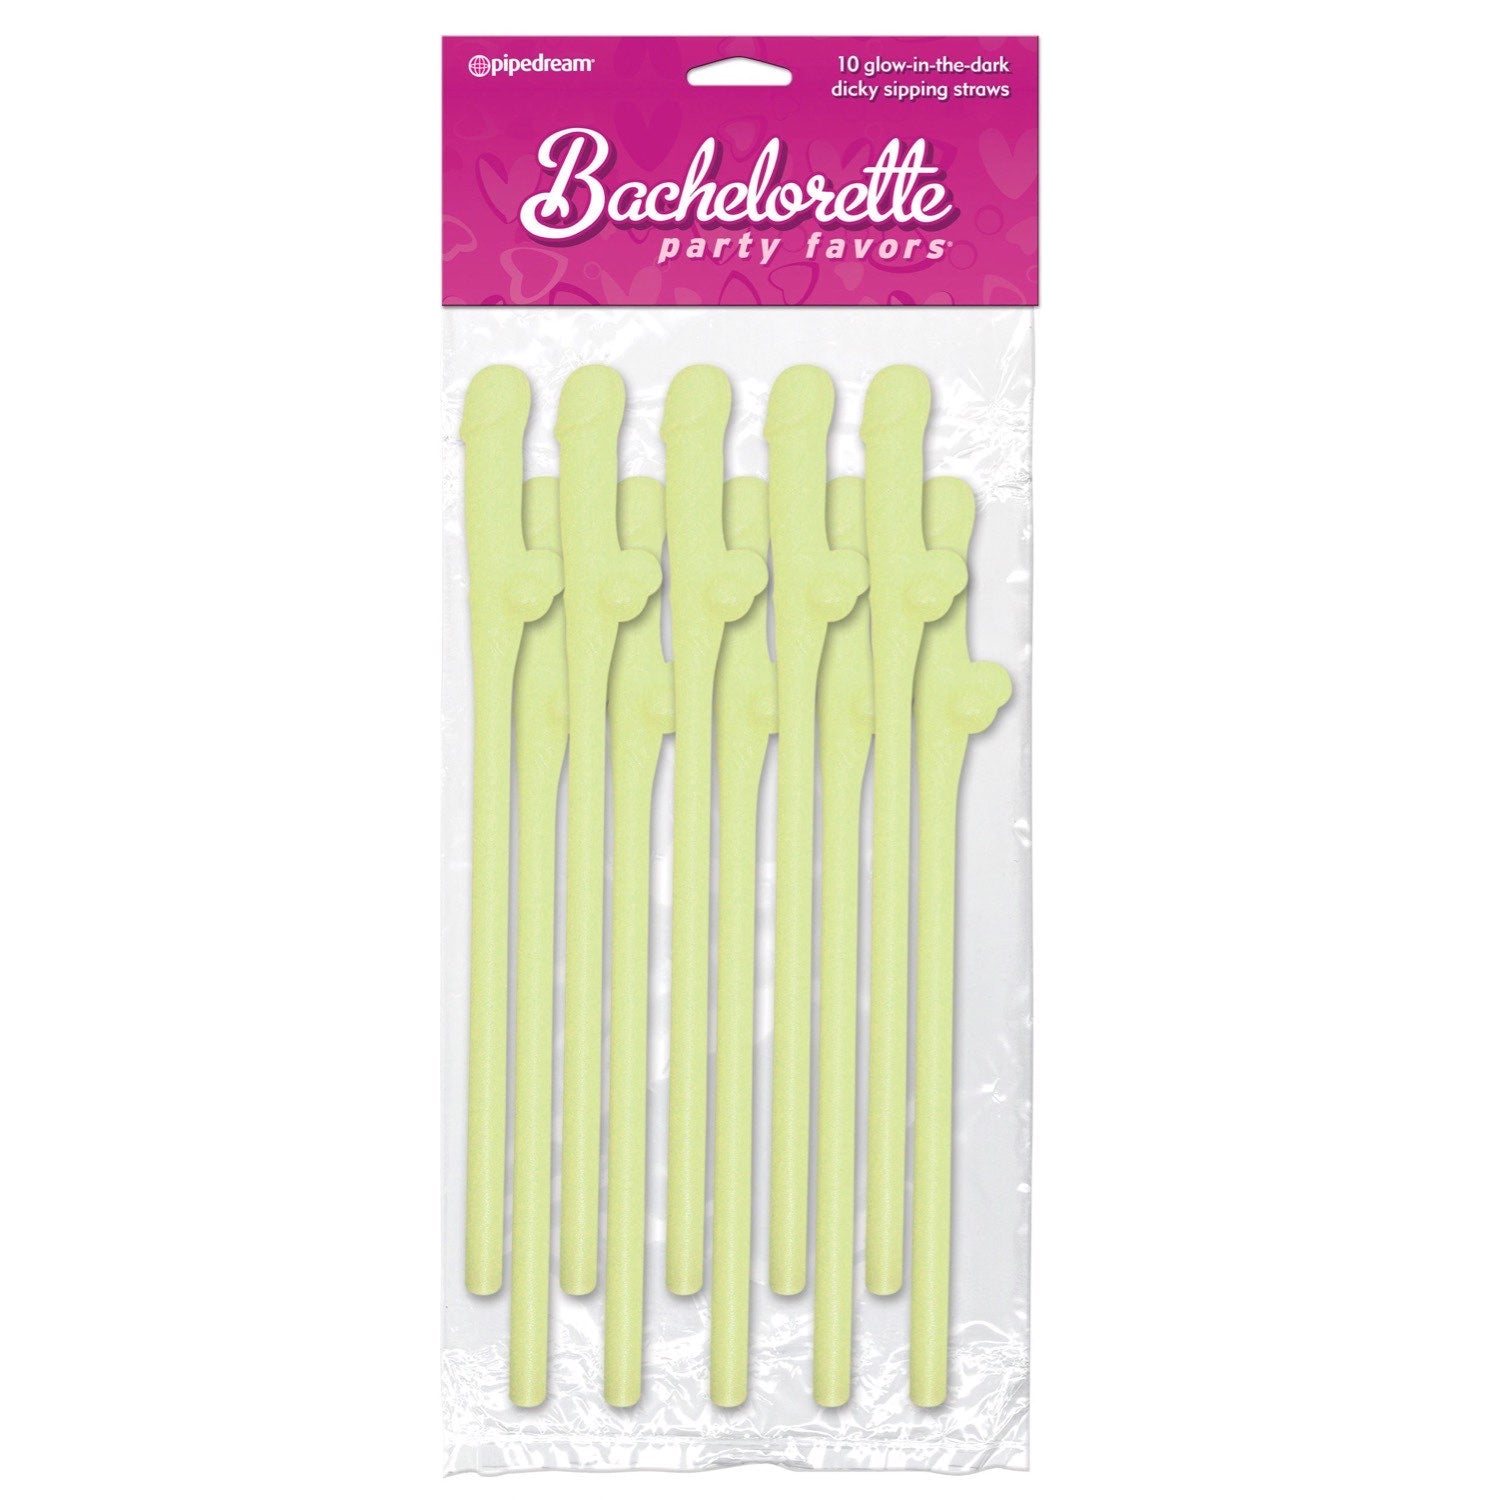 Bachelorette Party Favors Dicky Sipping Straws - Glow in the Dark Straws - Set of 10 by Pipedream